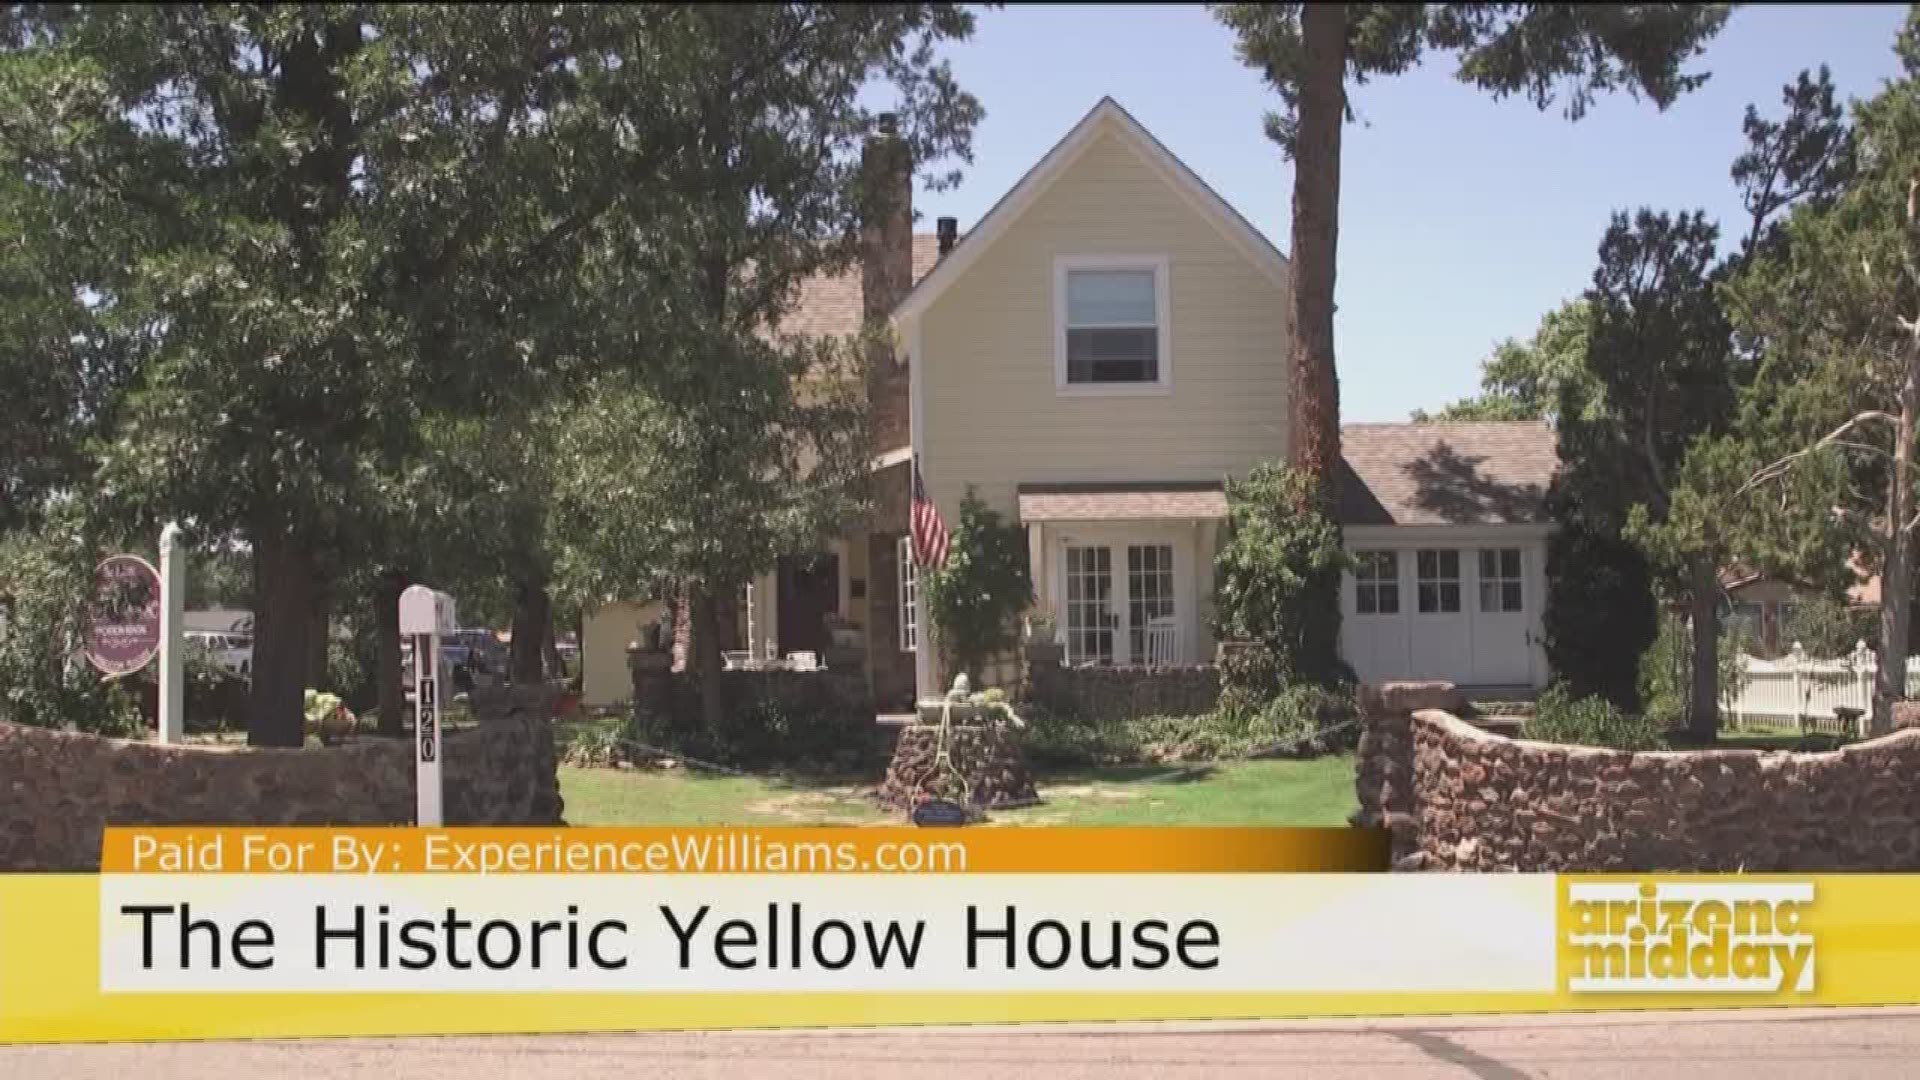 Spend a night at the Historic, yet modern Yellow House, just a stone's throw from historic downtown Williams.